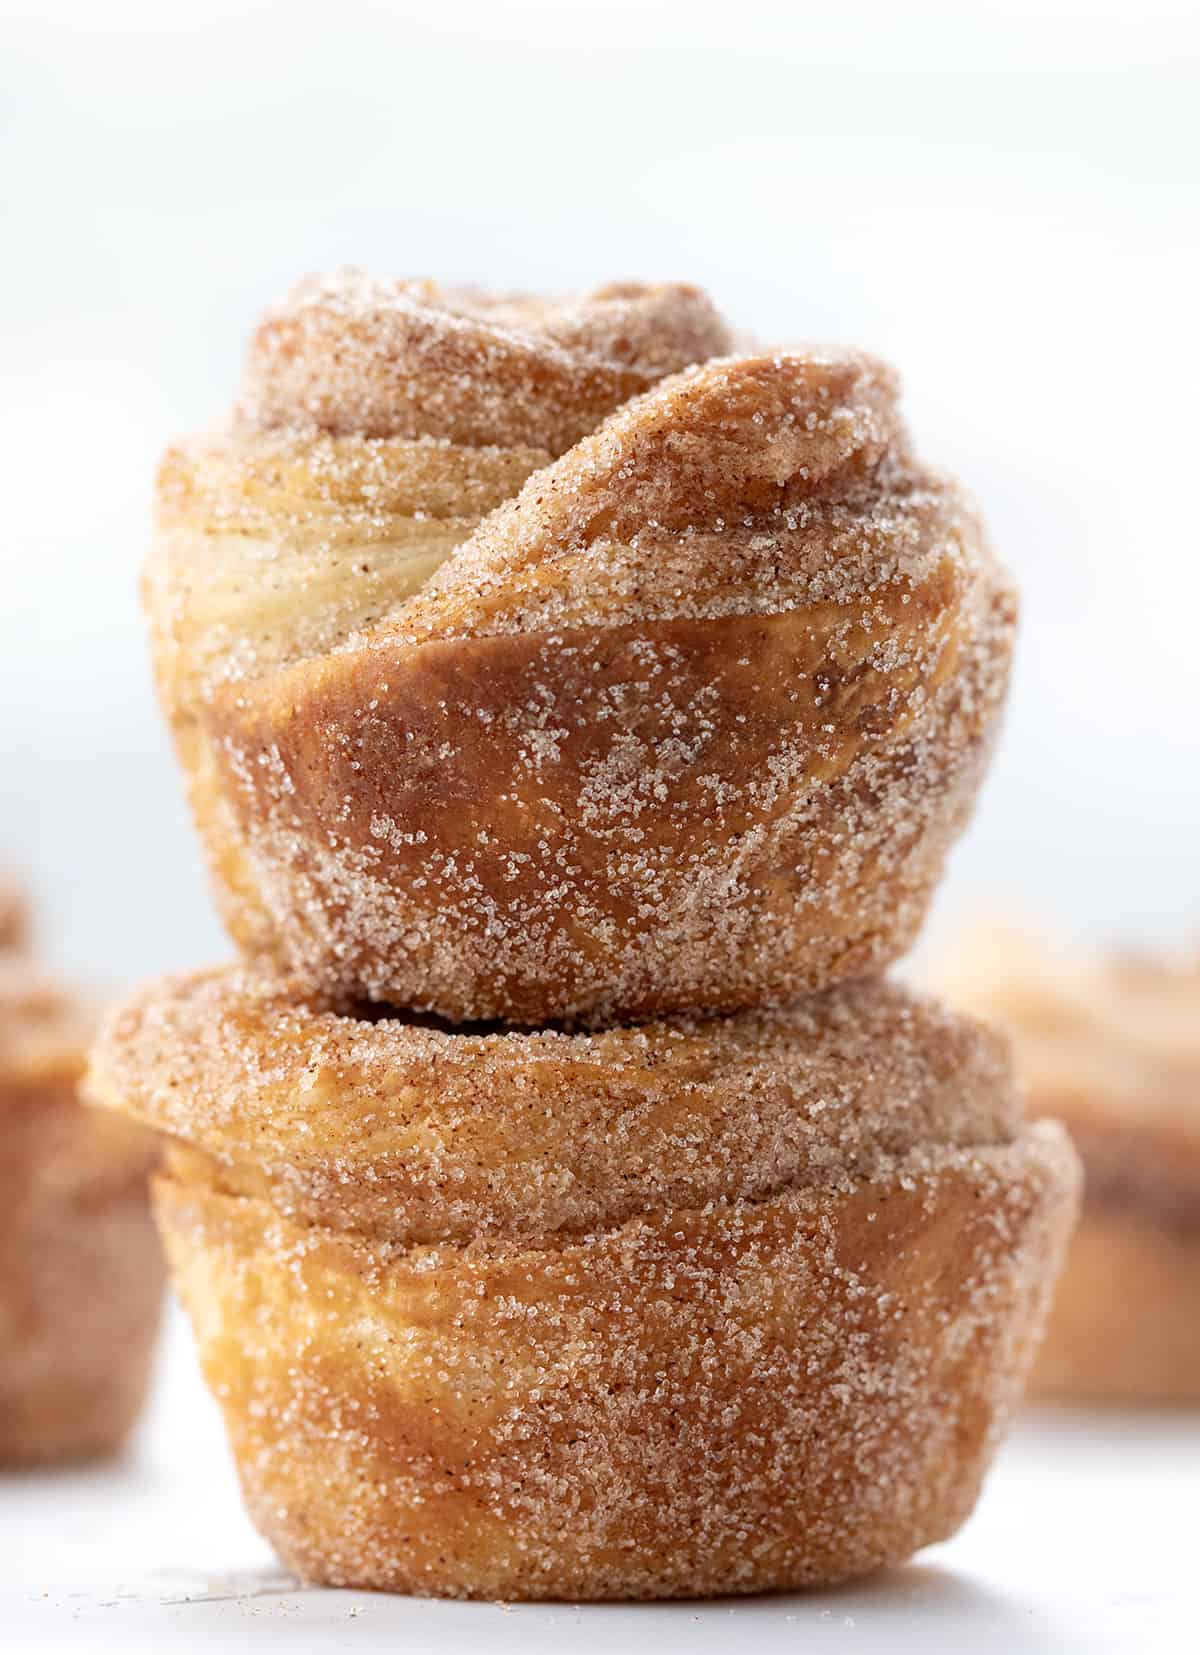 Stacked Homemade Cruffins on a White Counter.